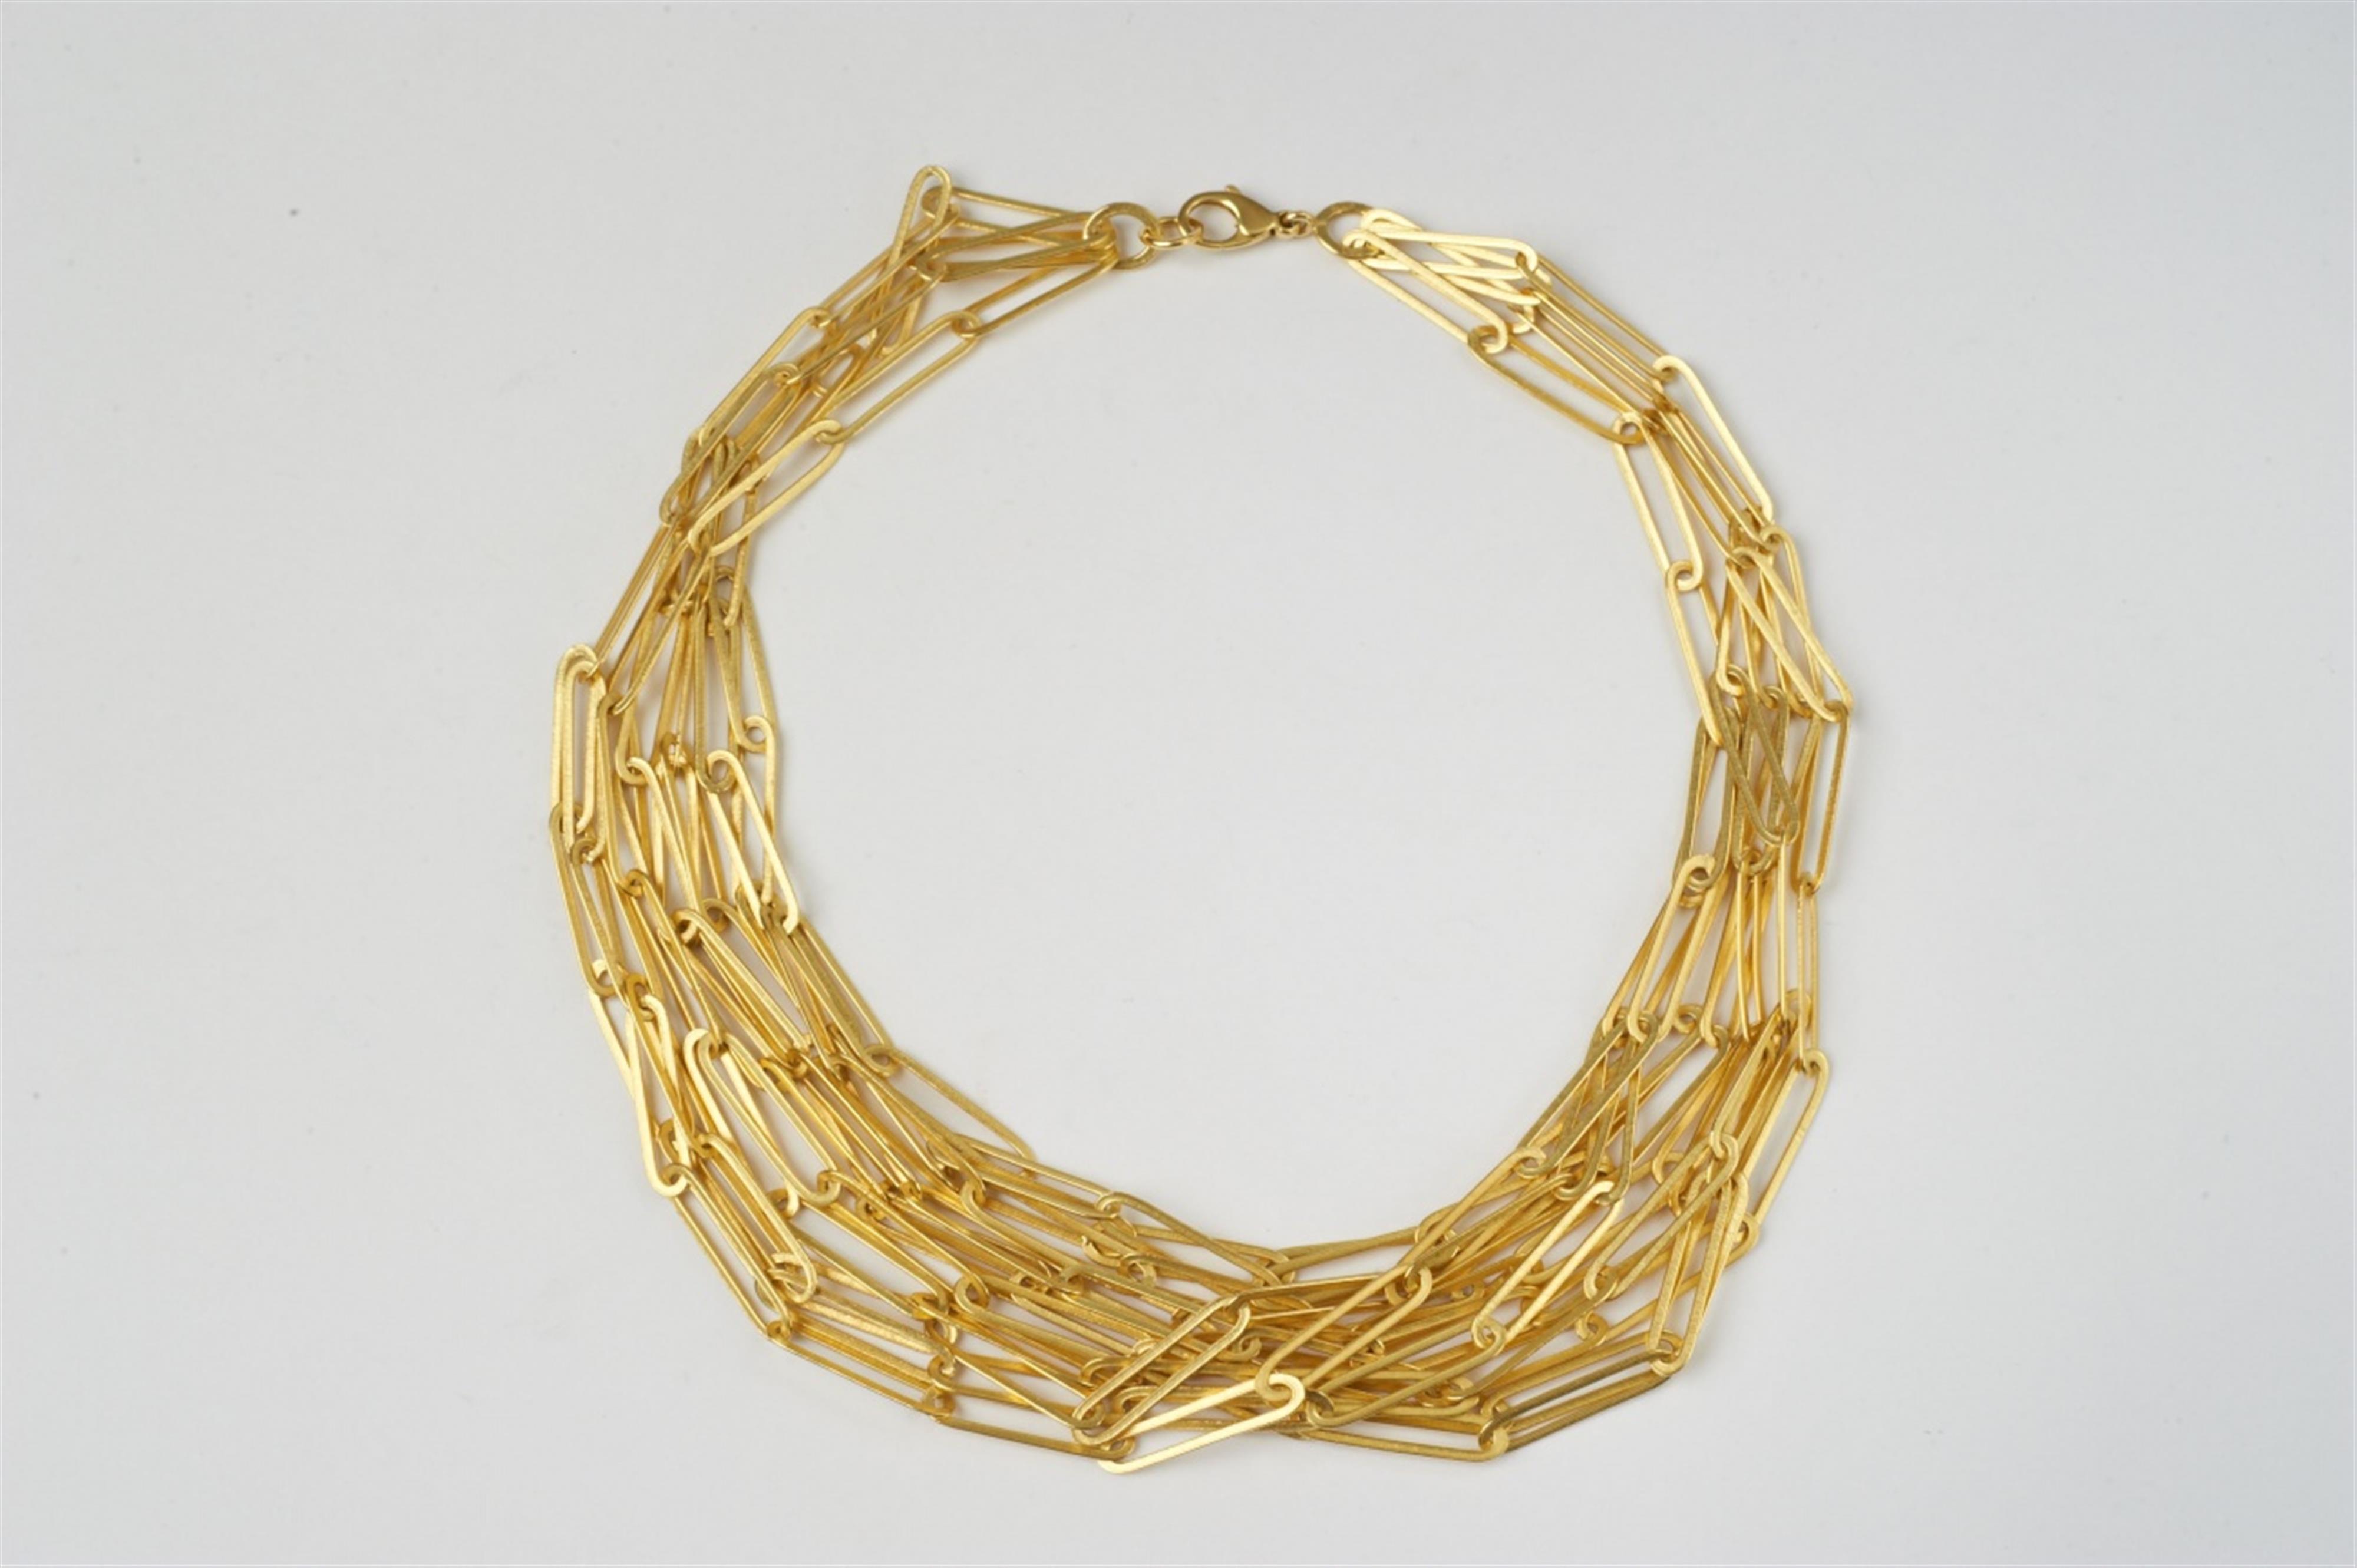 A unique, hand-forged 18k gold "paperclip" necklace by Albert Sous - image-1